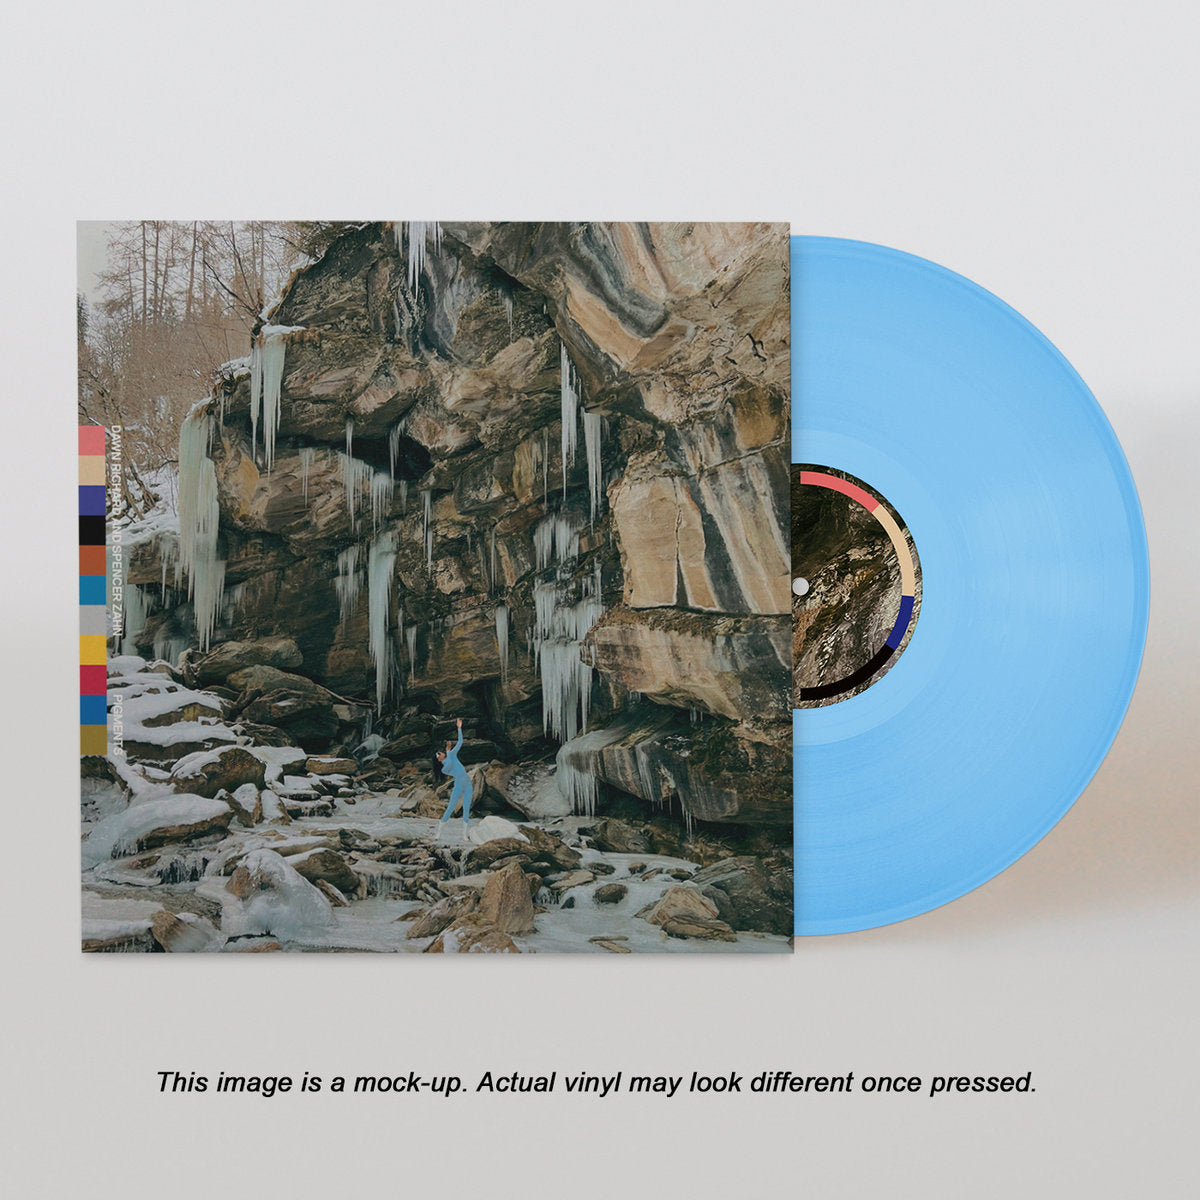 Dawn Richard and Spencer Zahn - Pigments (Limited Edition on Baby Blue Vinyl)